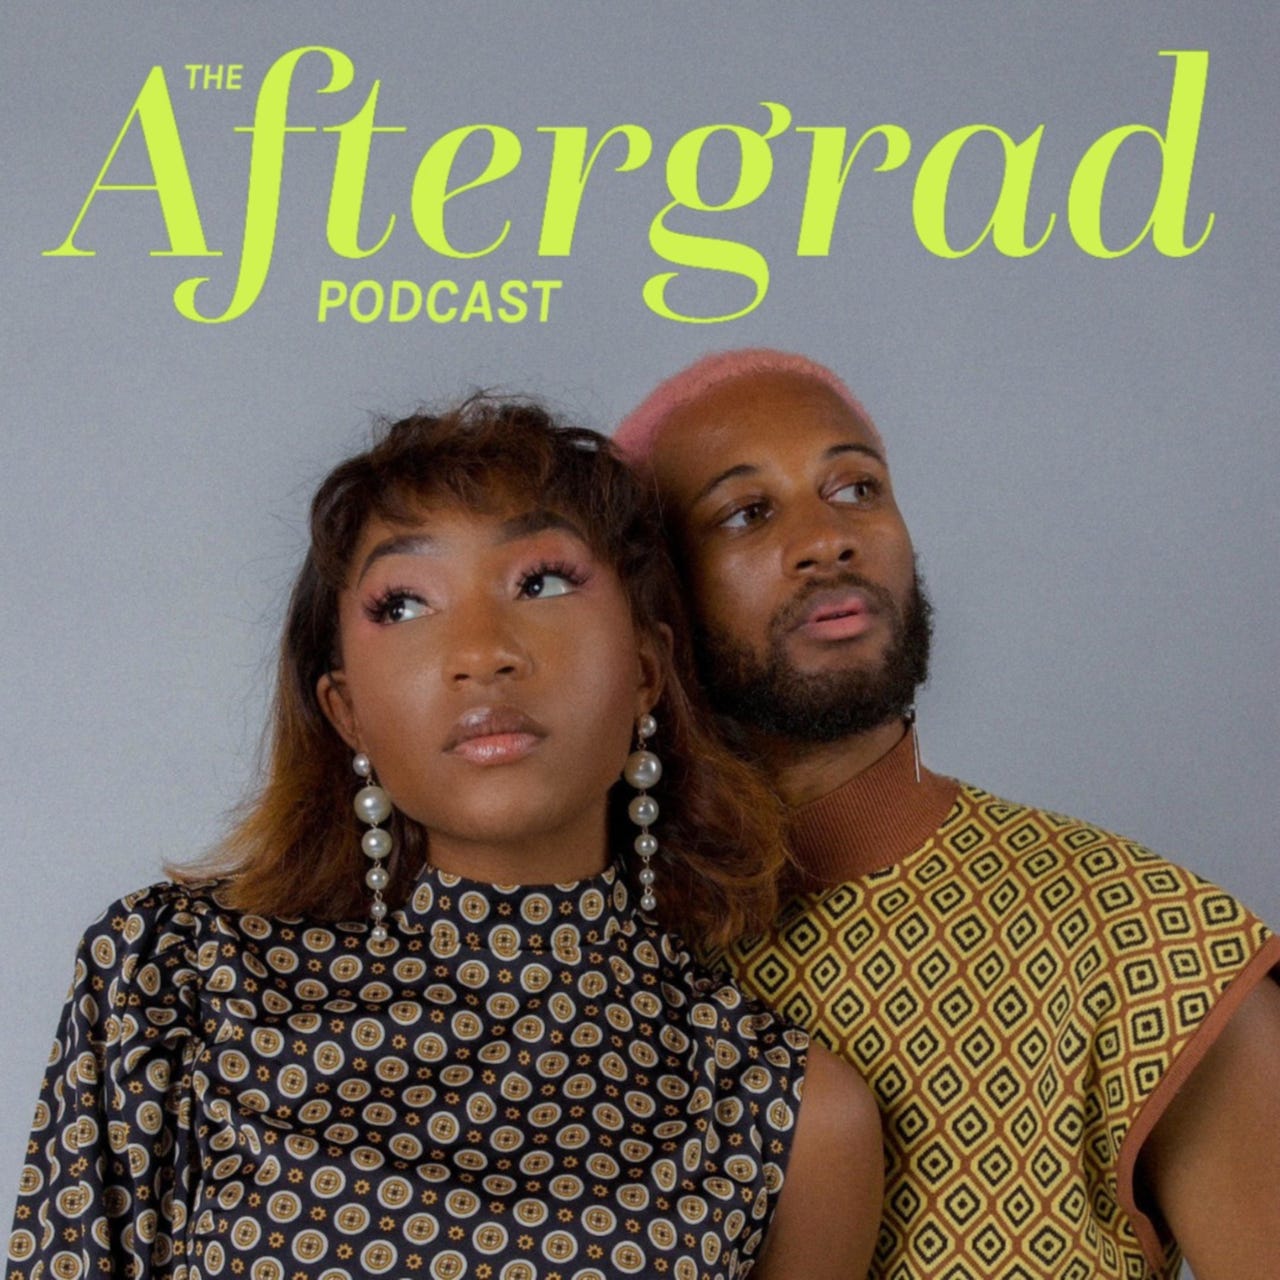 Introducing The Aftergrad Podcast